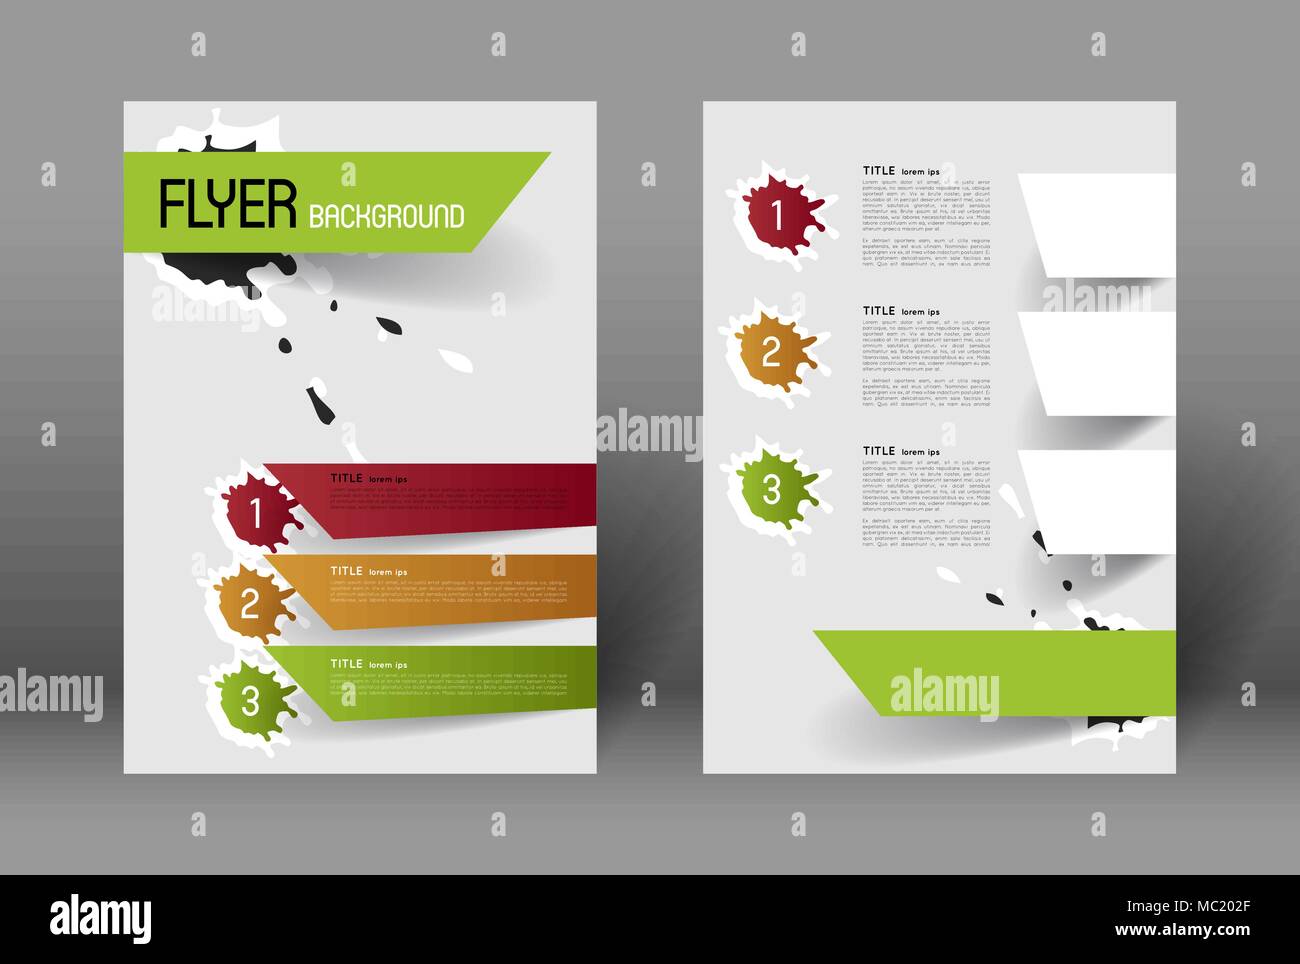 Modern Flyer Design Template With Option Banners And Paint Splatters Stock Vector Image Art Alamy